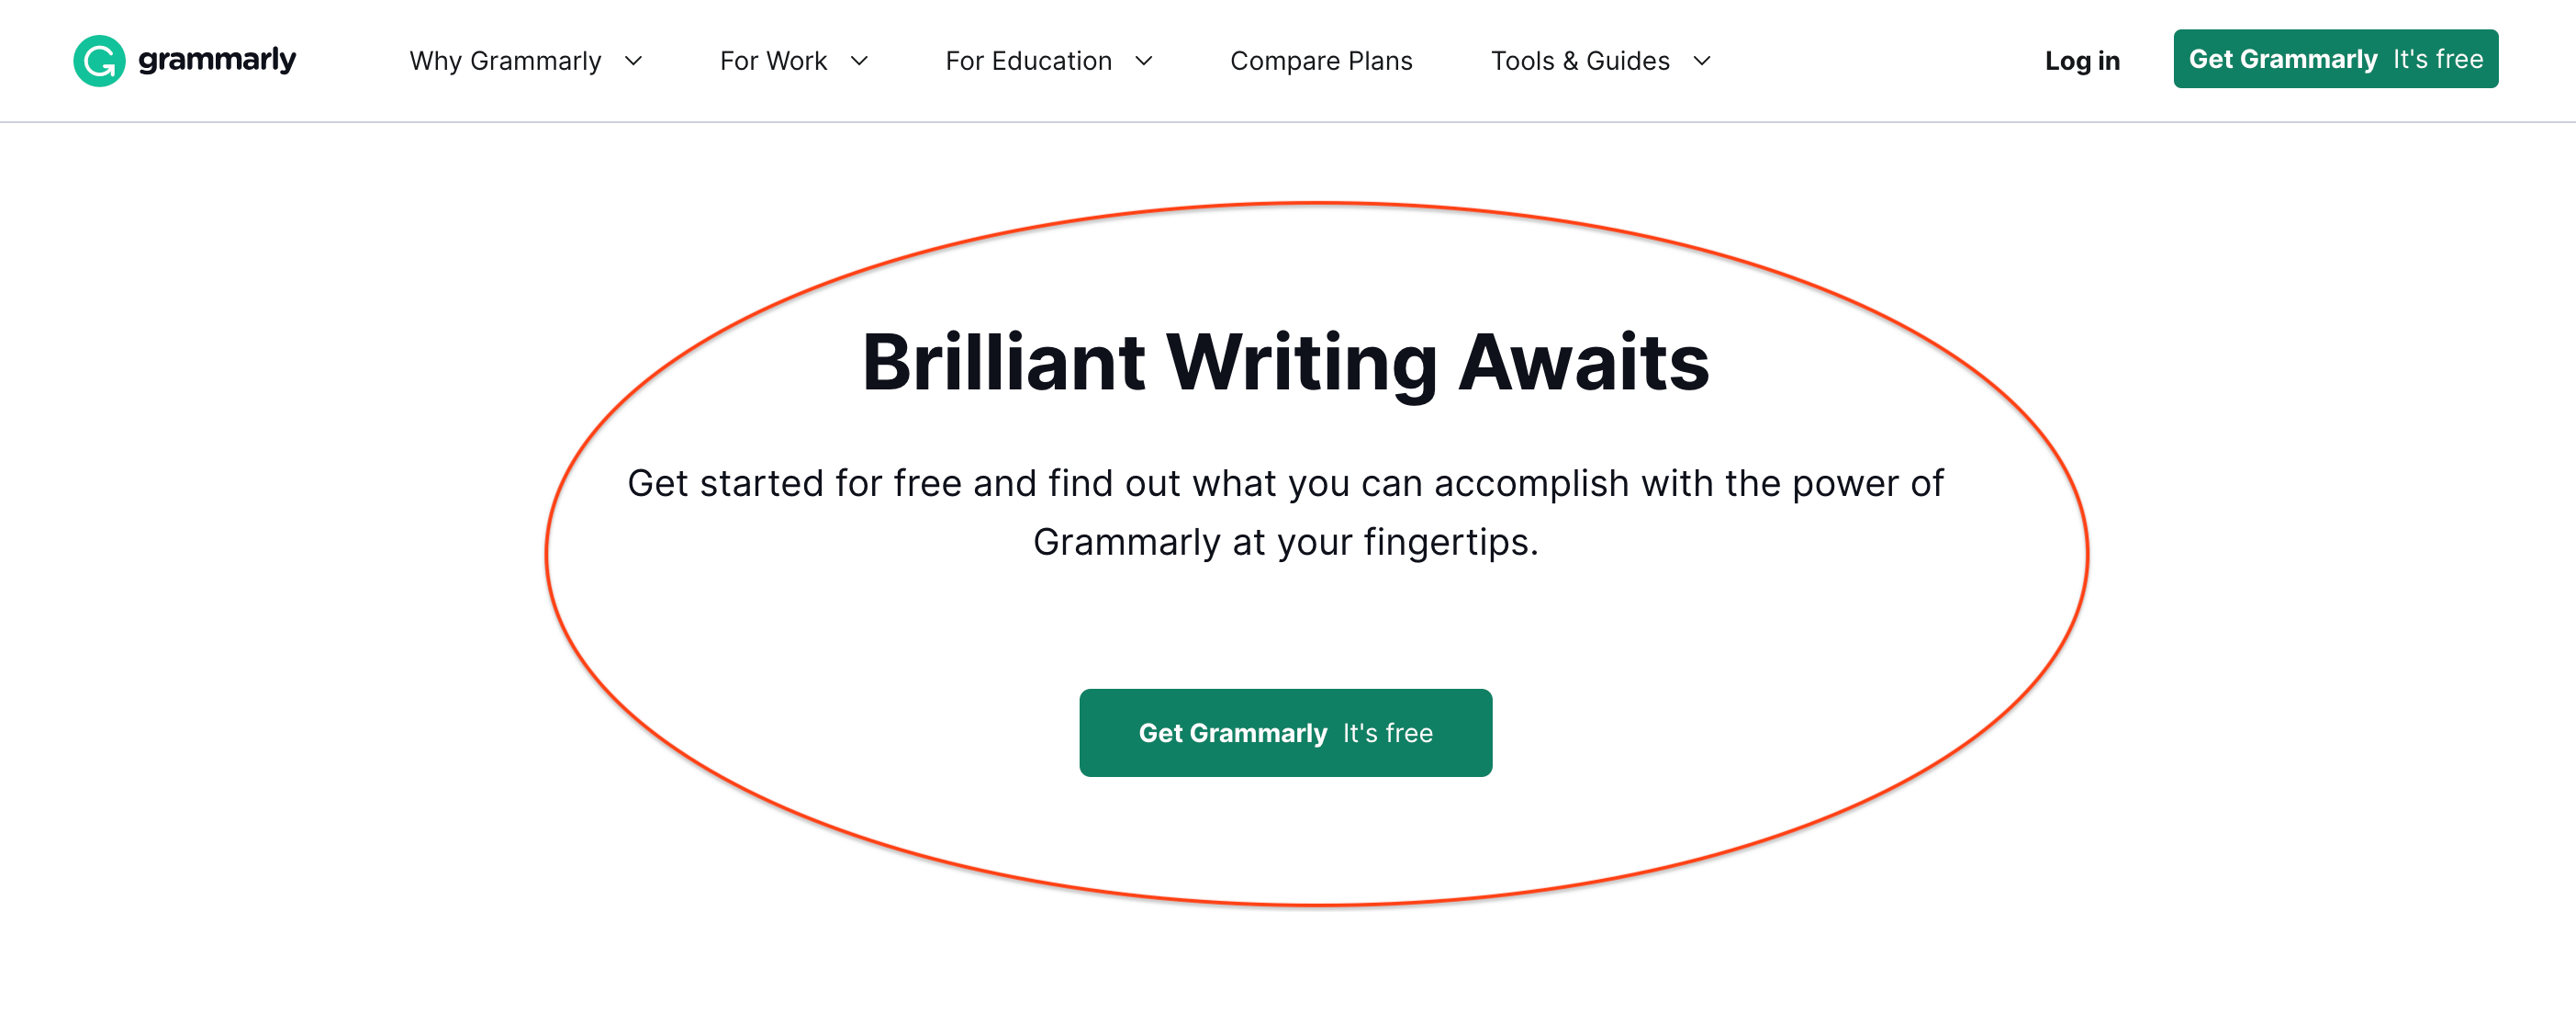 Call to action examples - grammarly